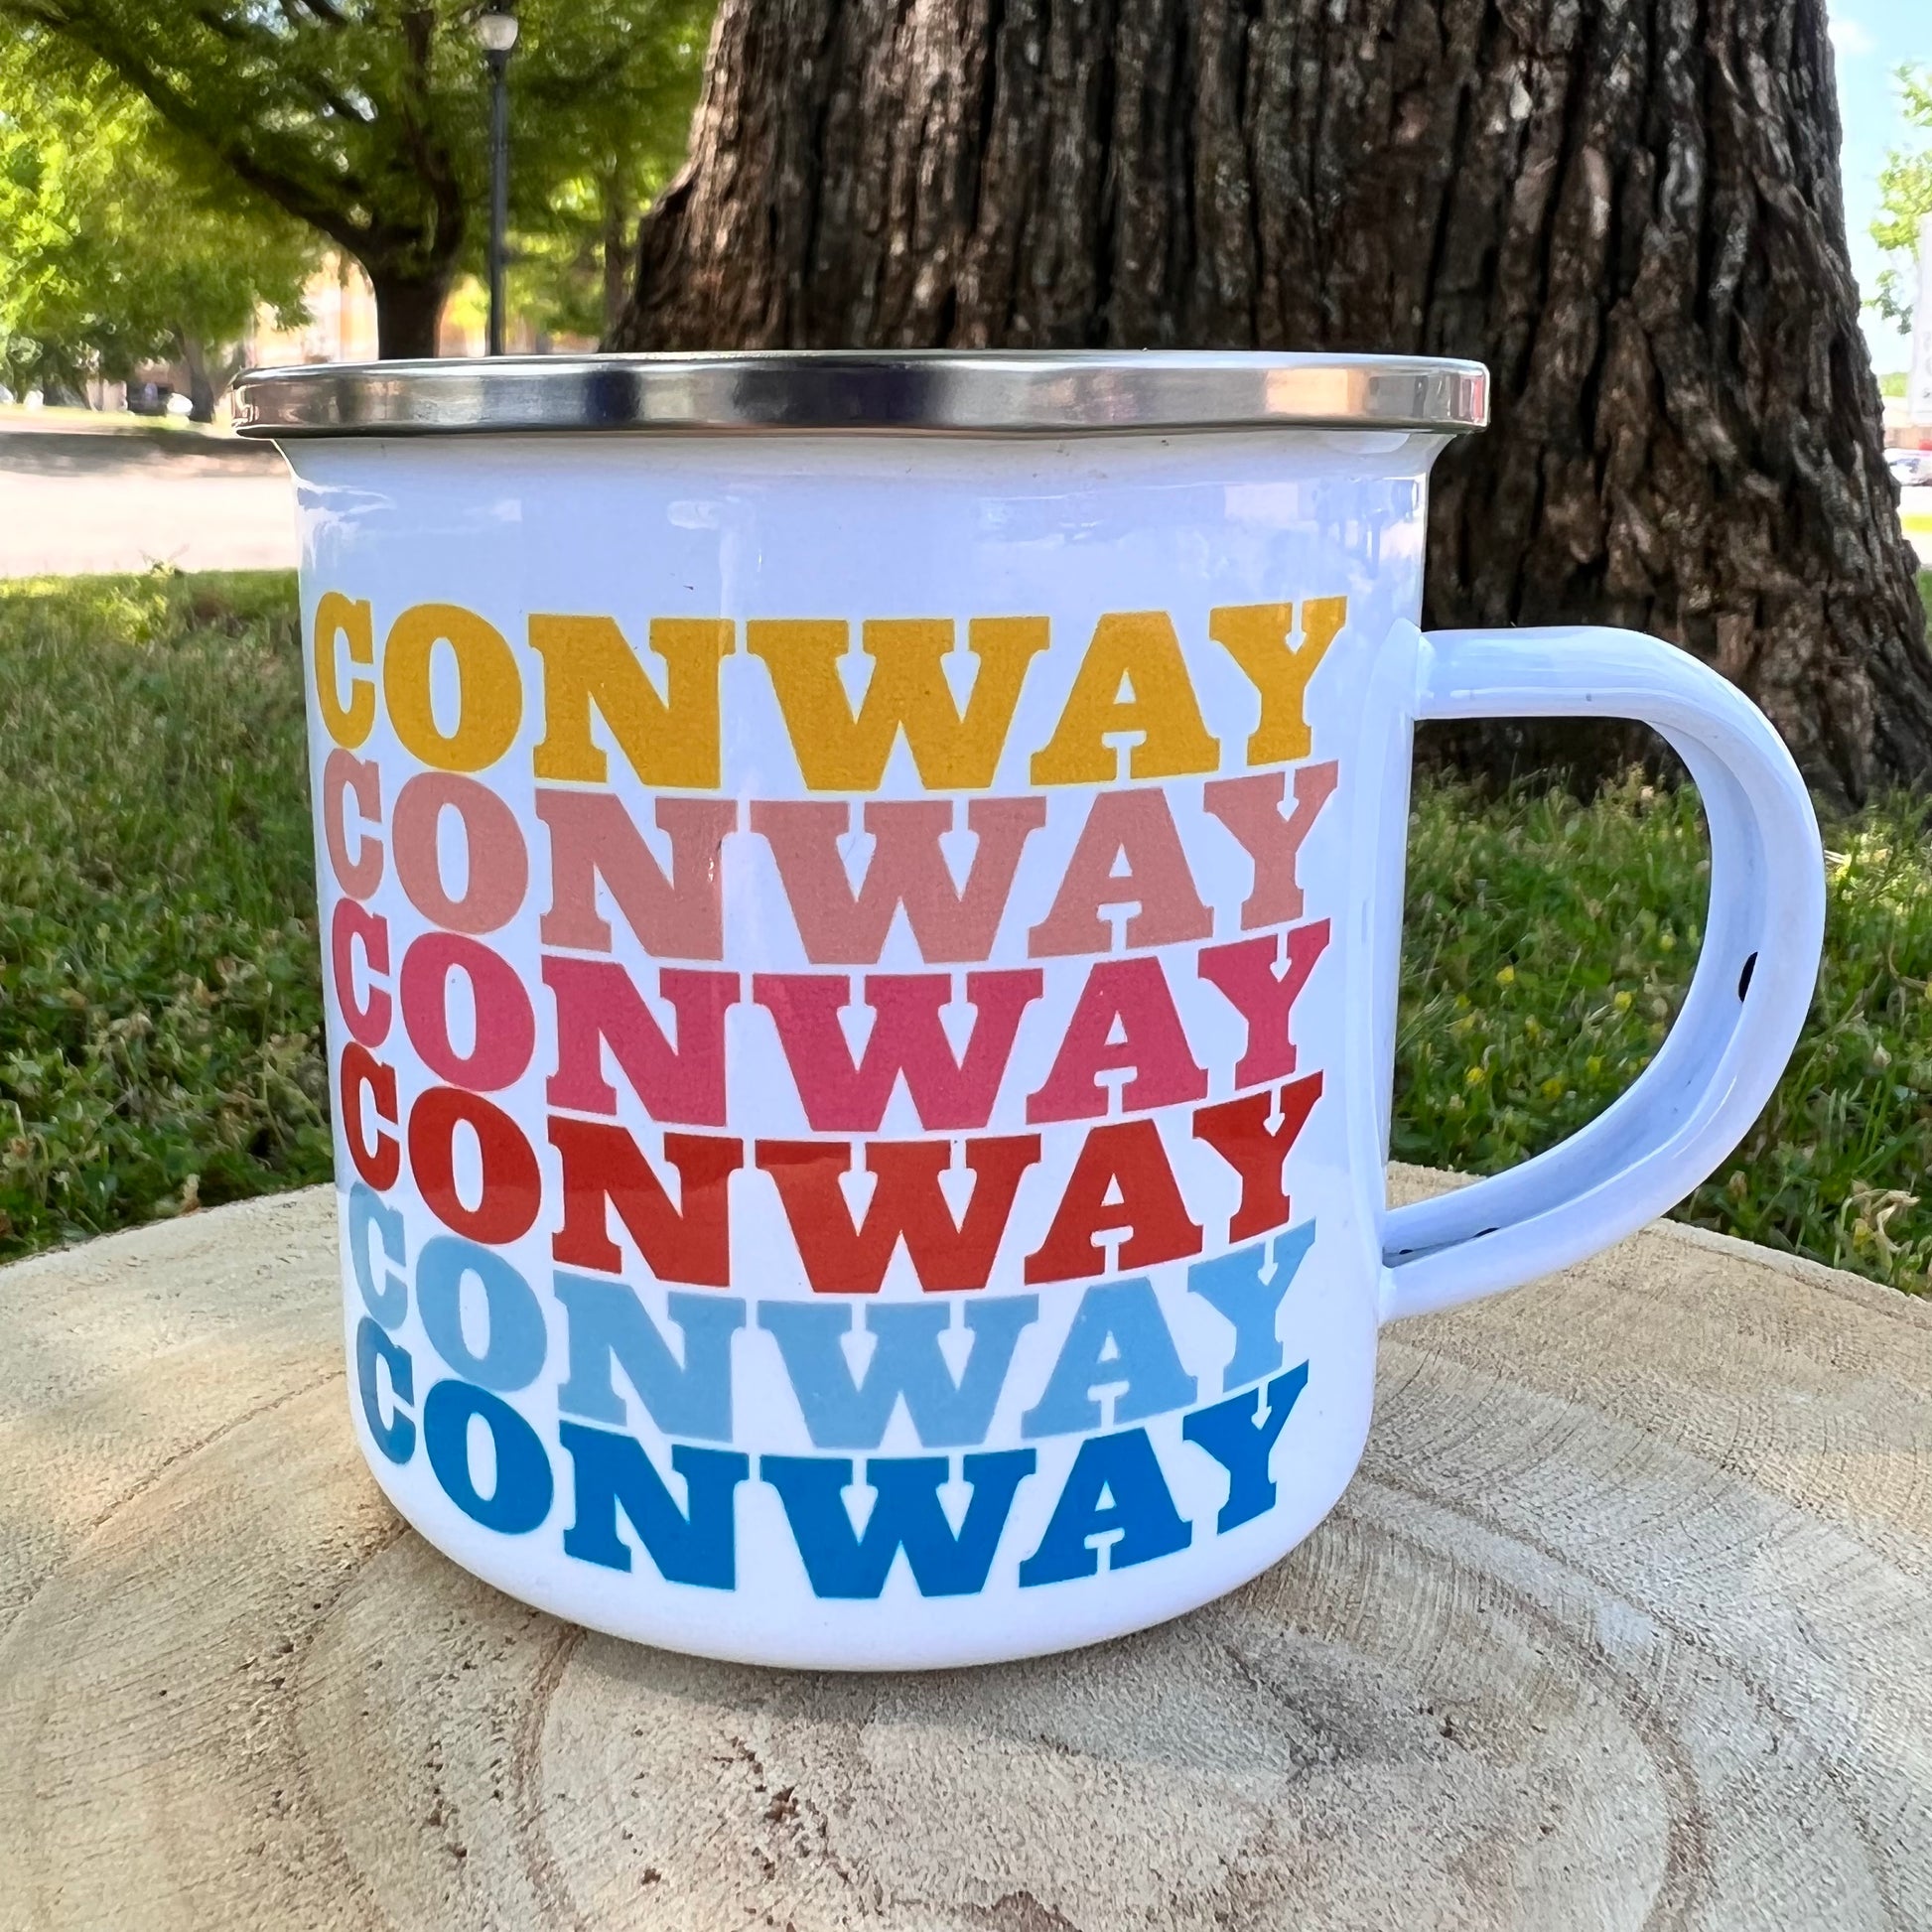 tin mug with "conway" written six times in rainbow colors.